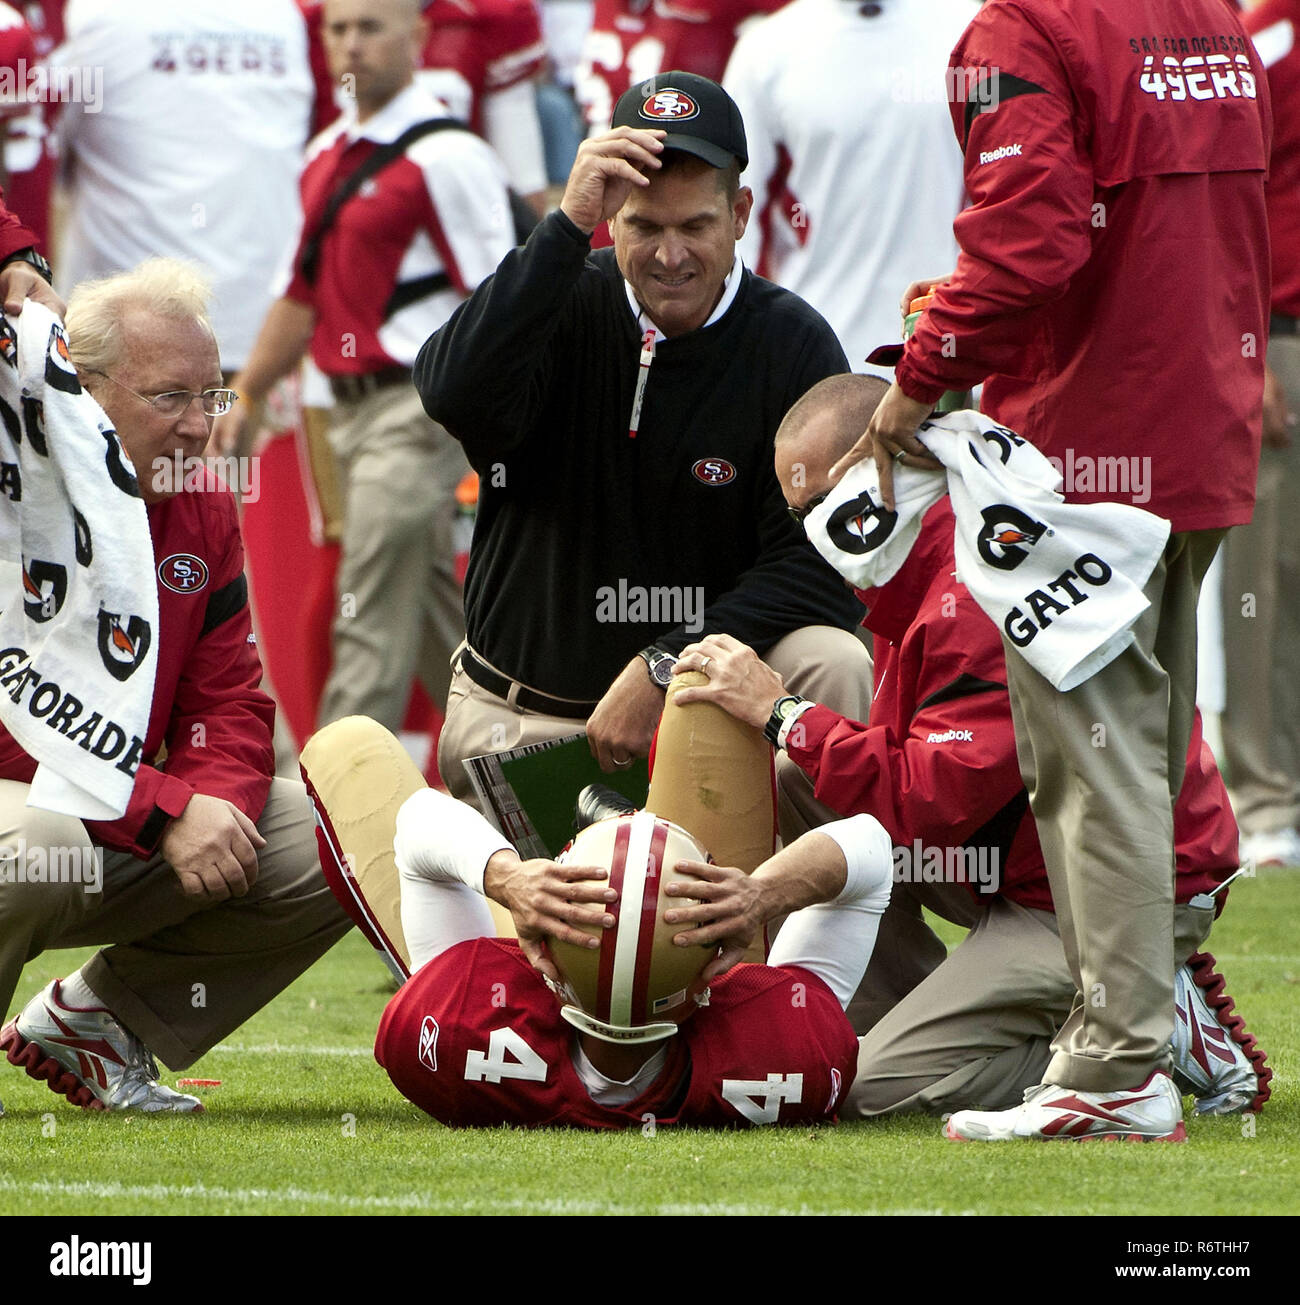 San Francisco, California, USA. 20th Aug, 2011. San Francisco Head Coach Jim Harbaugh checks on San Francisco 49ers punter Andy Lee (4) after he was injured on Sunday, August 20, 2011 at Candlestick Park, San Francisco, California. The 49ers defeated the Raiders in preseason game 17-3. Credit: Al Golub/ZUMA Wire/Alamy Live News Stock Photo